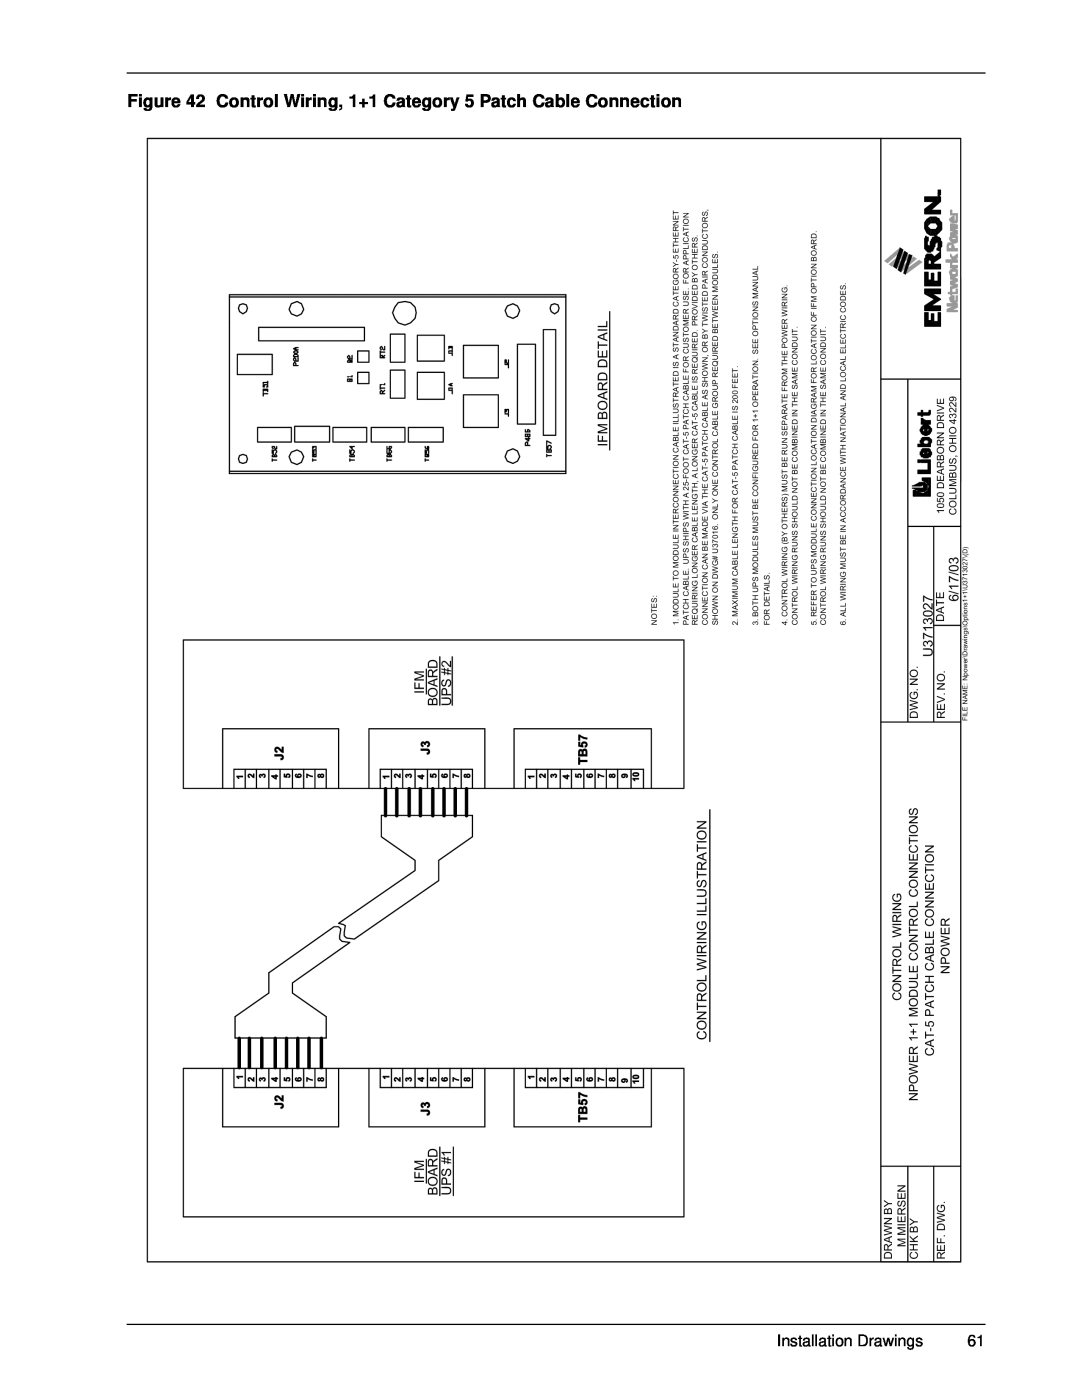 Emerson 30-130 kVA Control Wiring, 1+1 Category 5 Patch Cable Connection, Board, UPS #1, Control Wiring Illustration 